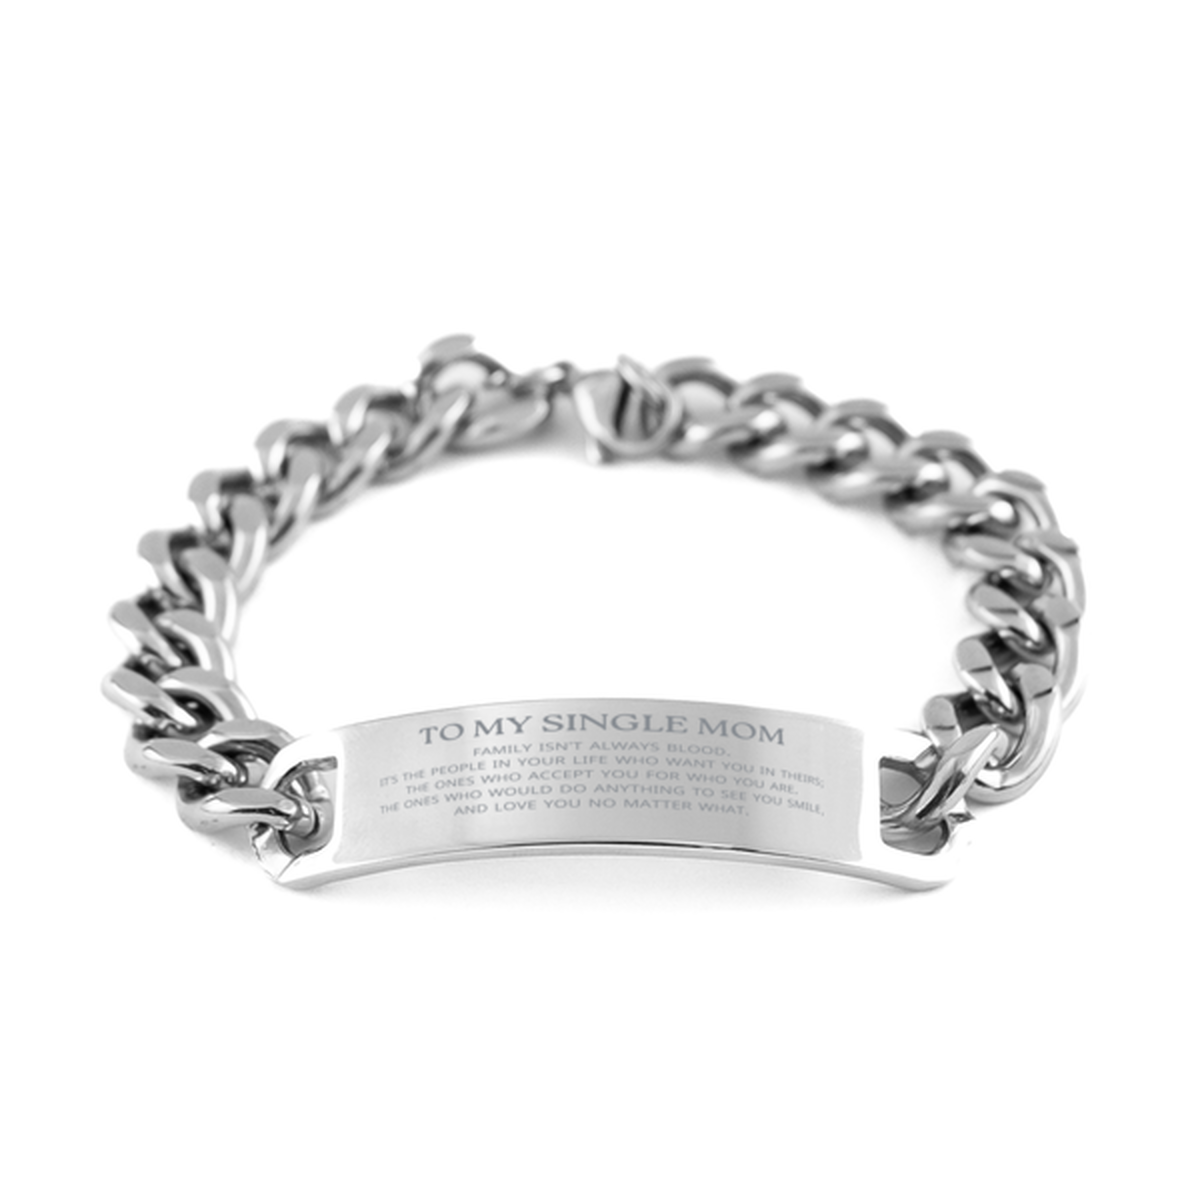 To My Single Mom Gifts, Family isn't always blood, Single Mom Cuban Chain Stainless Steel Bracelet, Birthday Christmas Unique Present For Single Mom